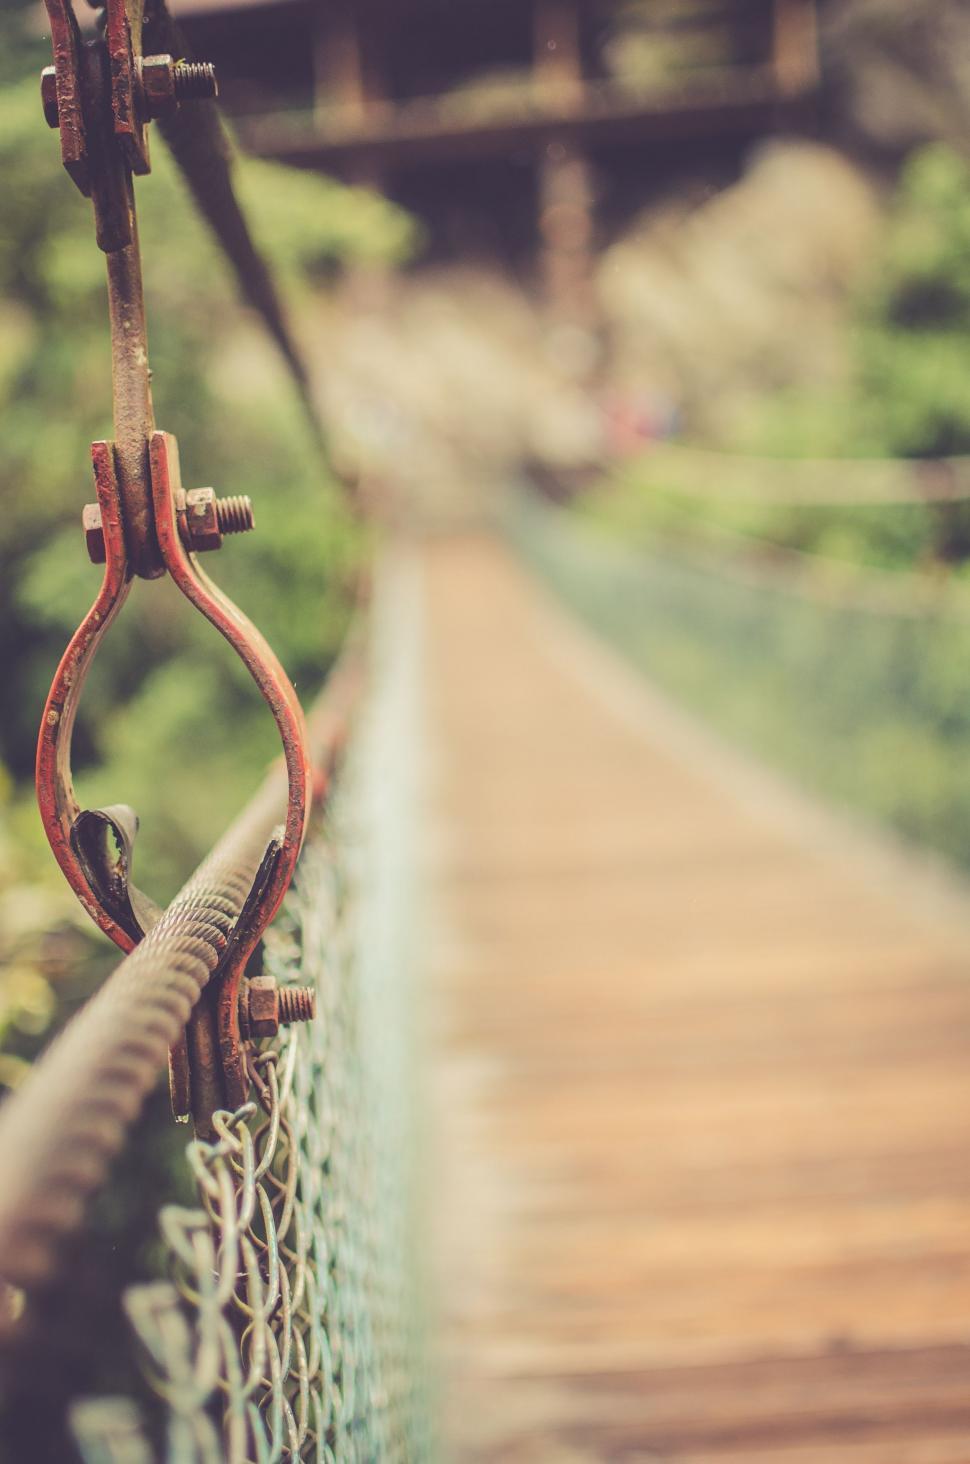 Free Image of Chain Link Fence With Wooden Bridge 